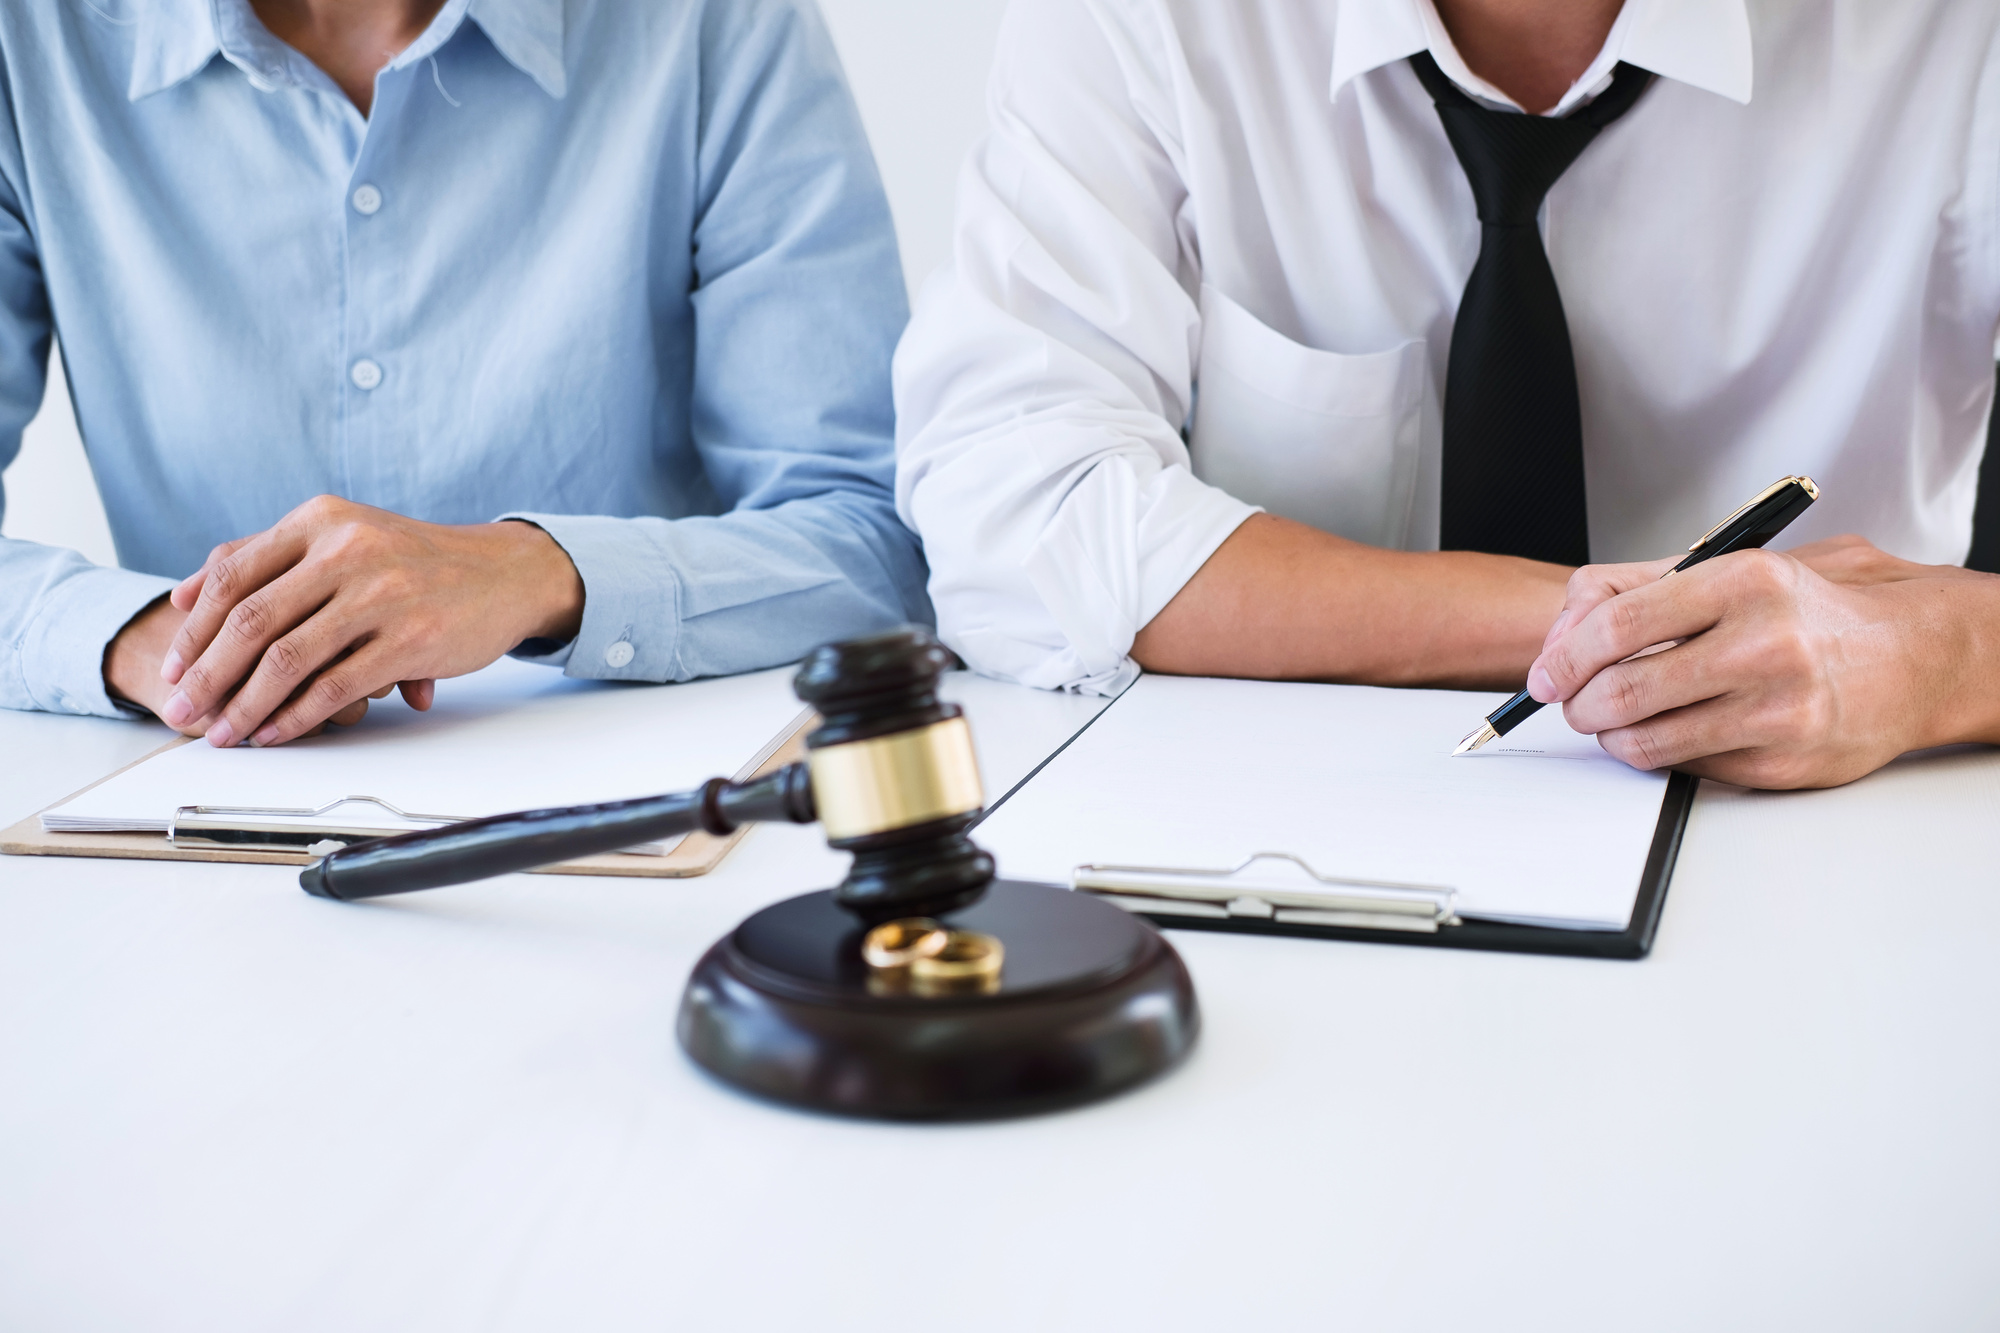 Top 10 Questions to Ask Before Hiring a Family Lawyer - Best Family Law Attorneys Near Me - Divorce Attorneys Near Me - FamilyAttorneysNearMe.com